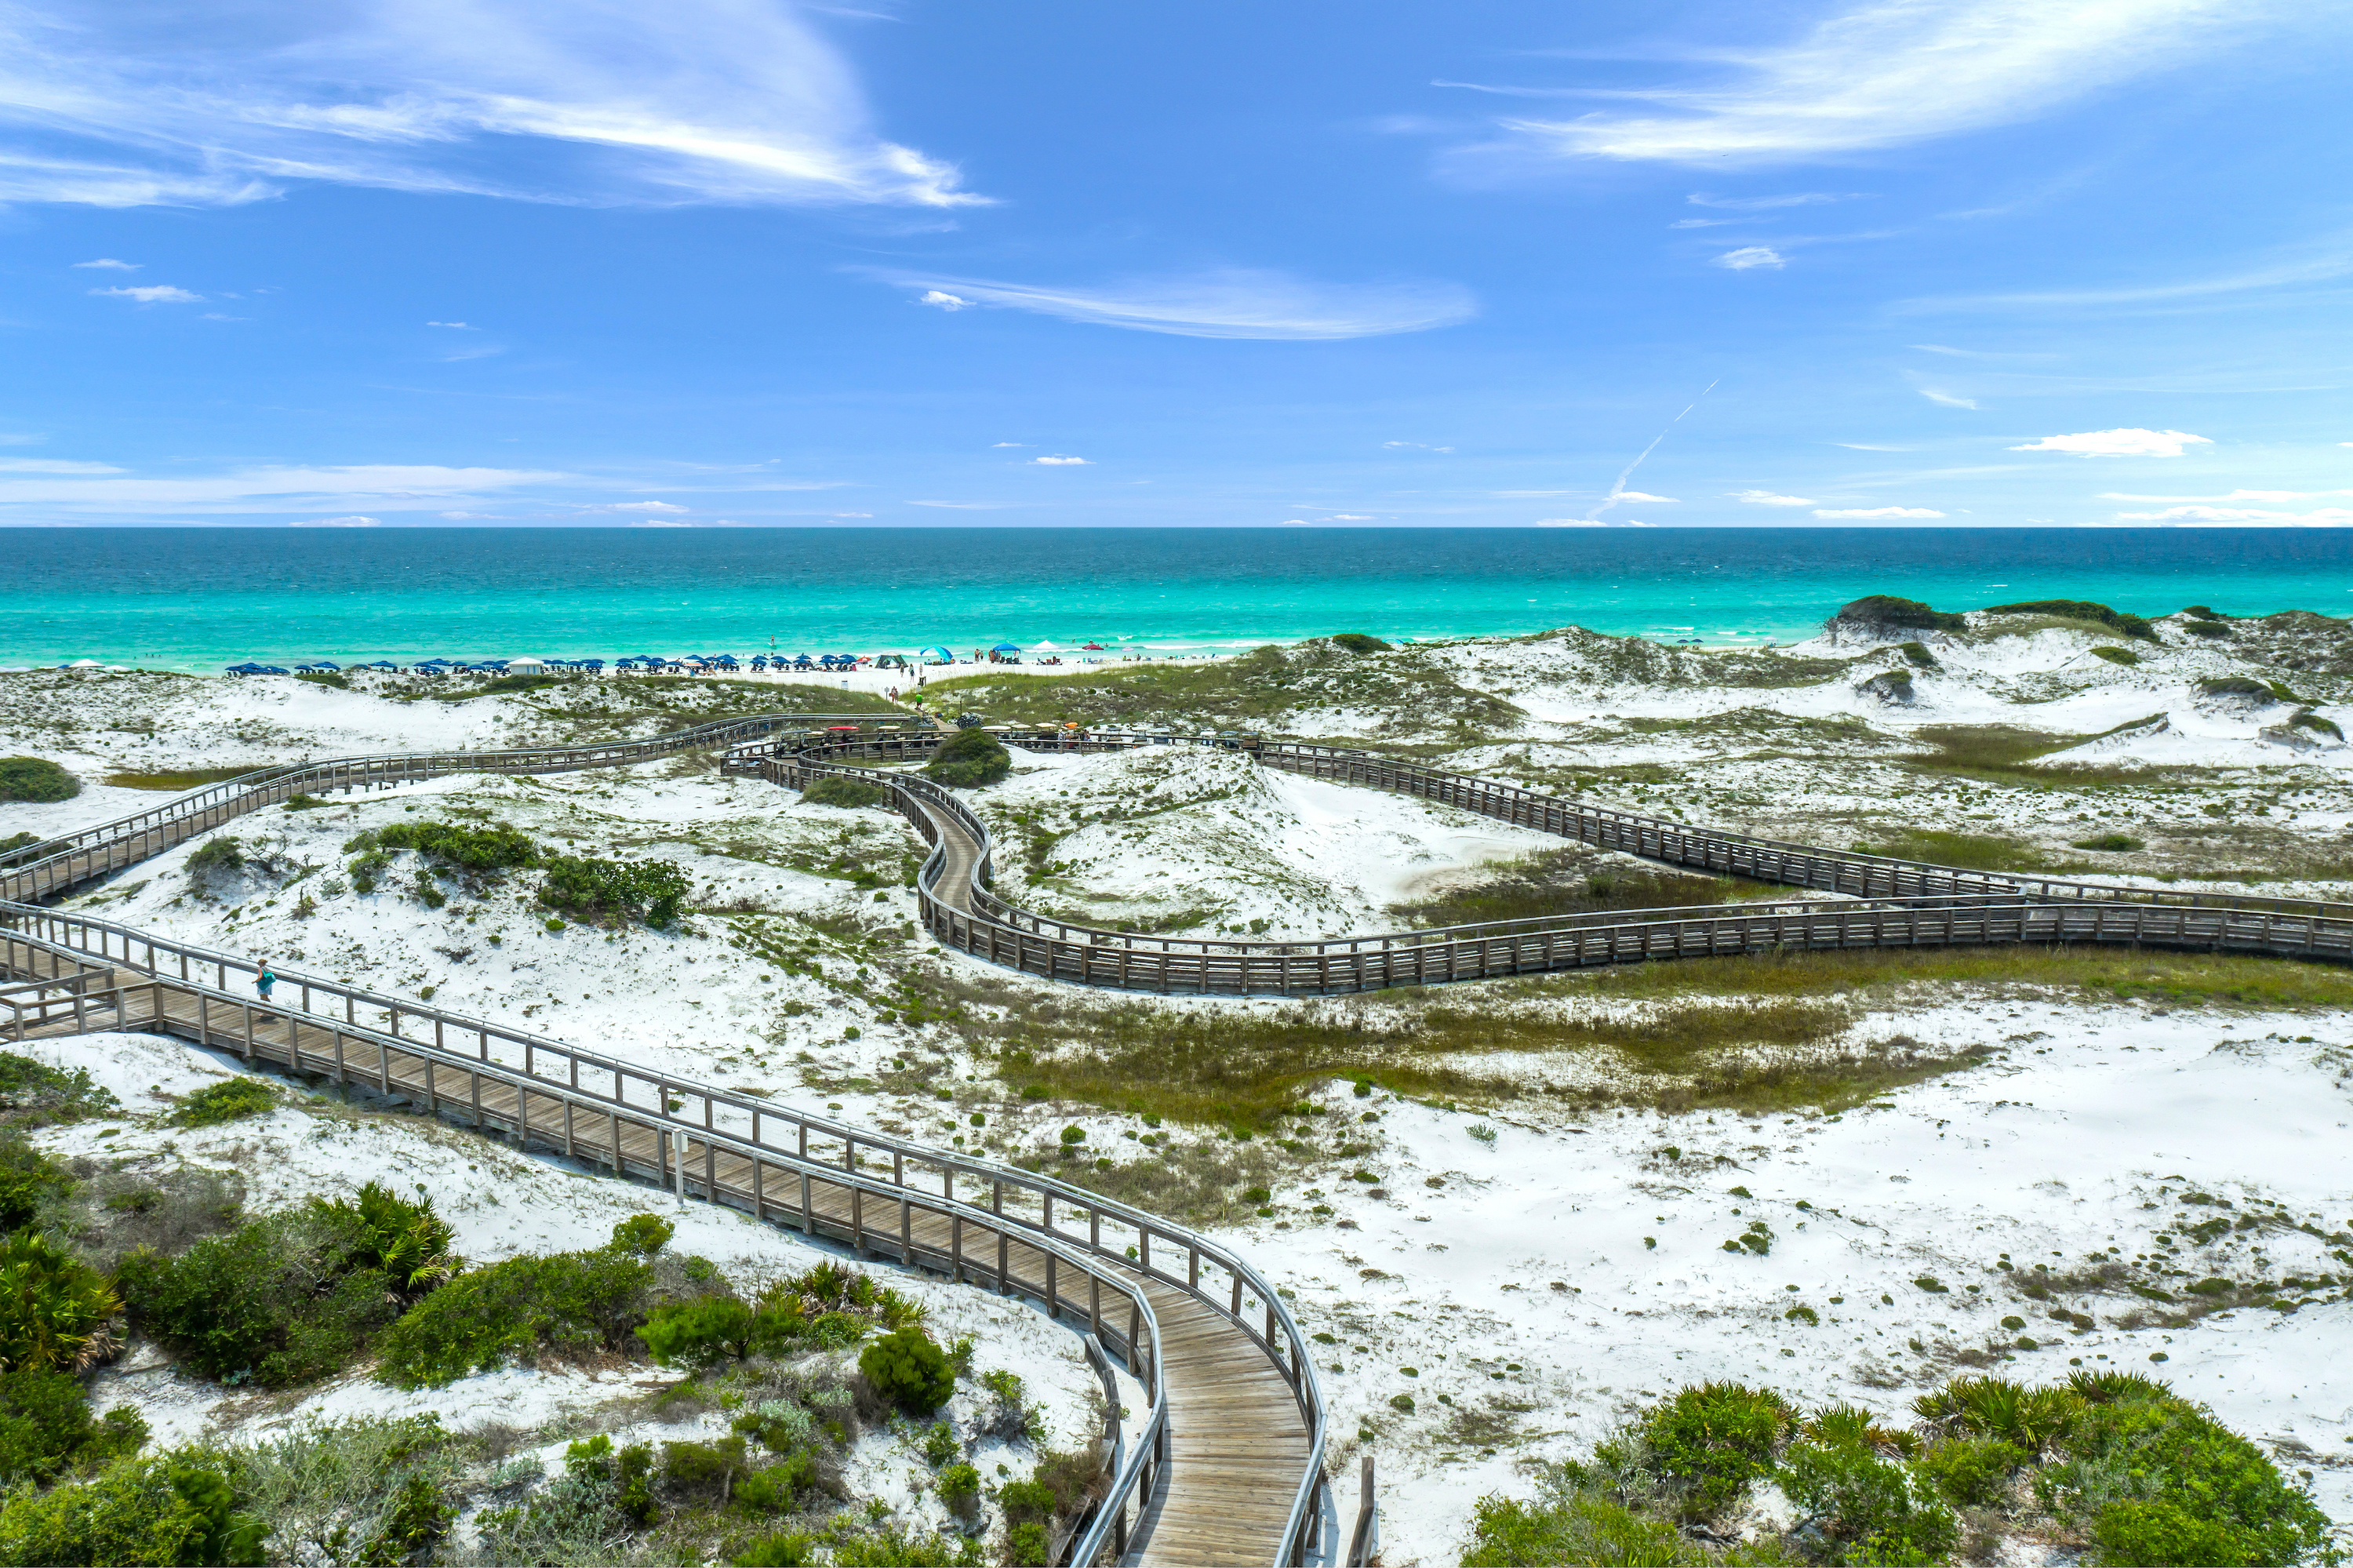 An aerial view of the scenic boardwalk to the beach with the brilliant gulf waters in the background